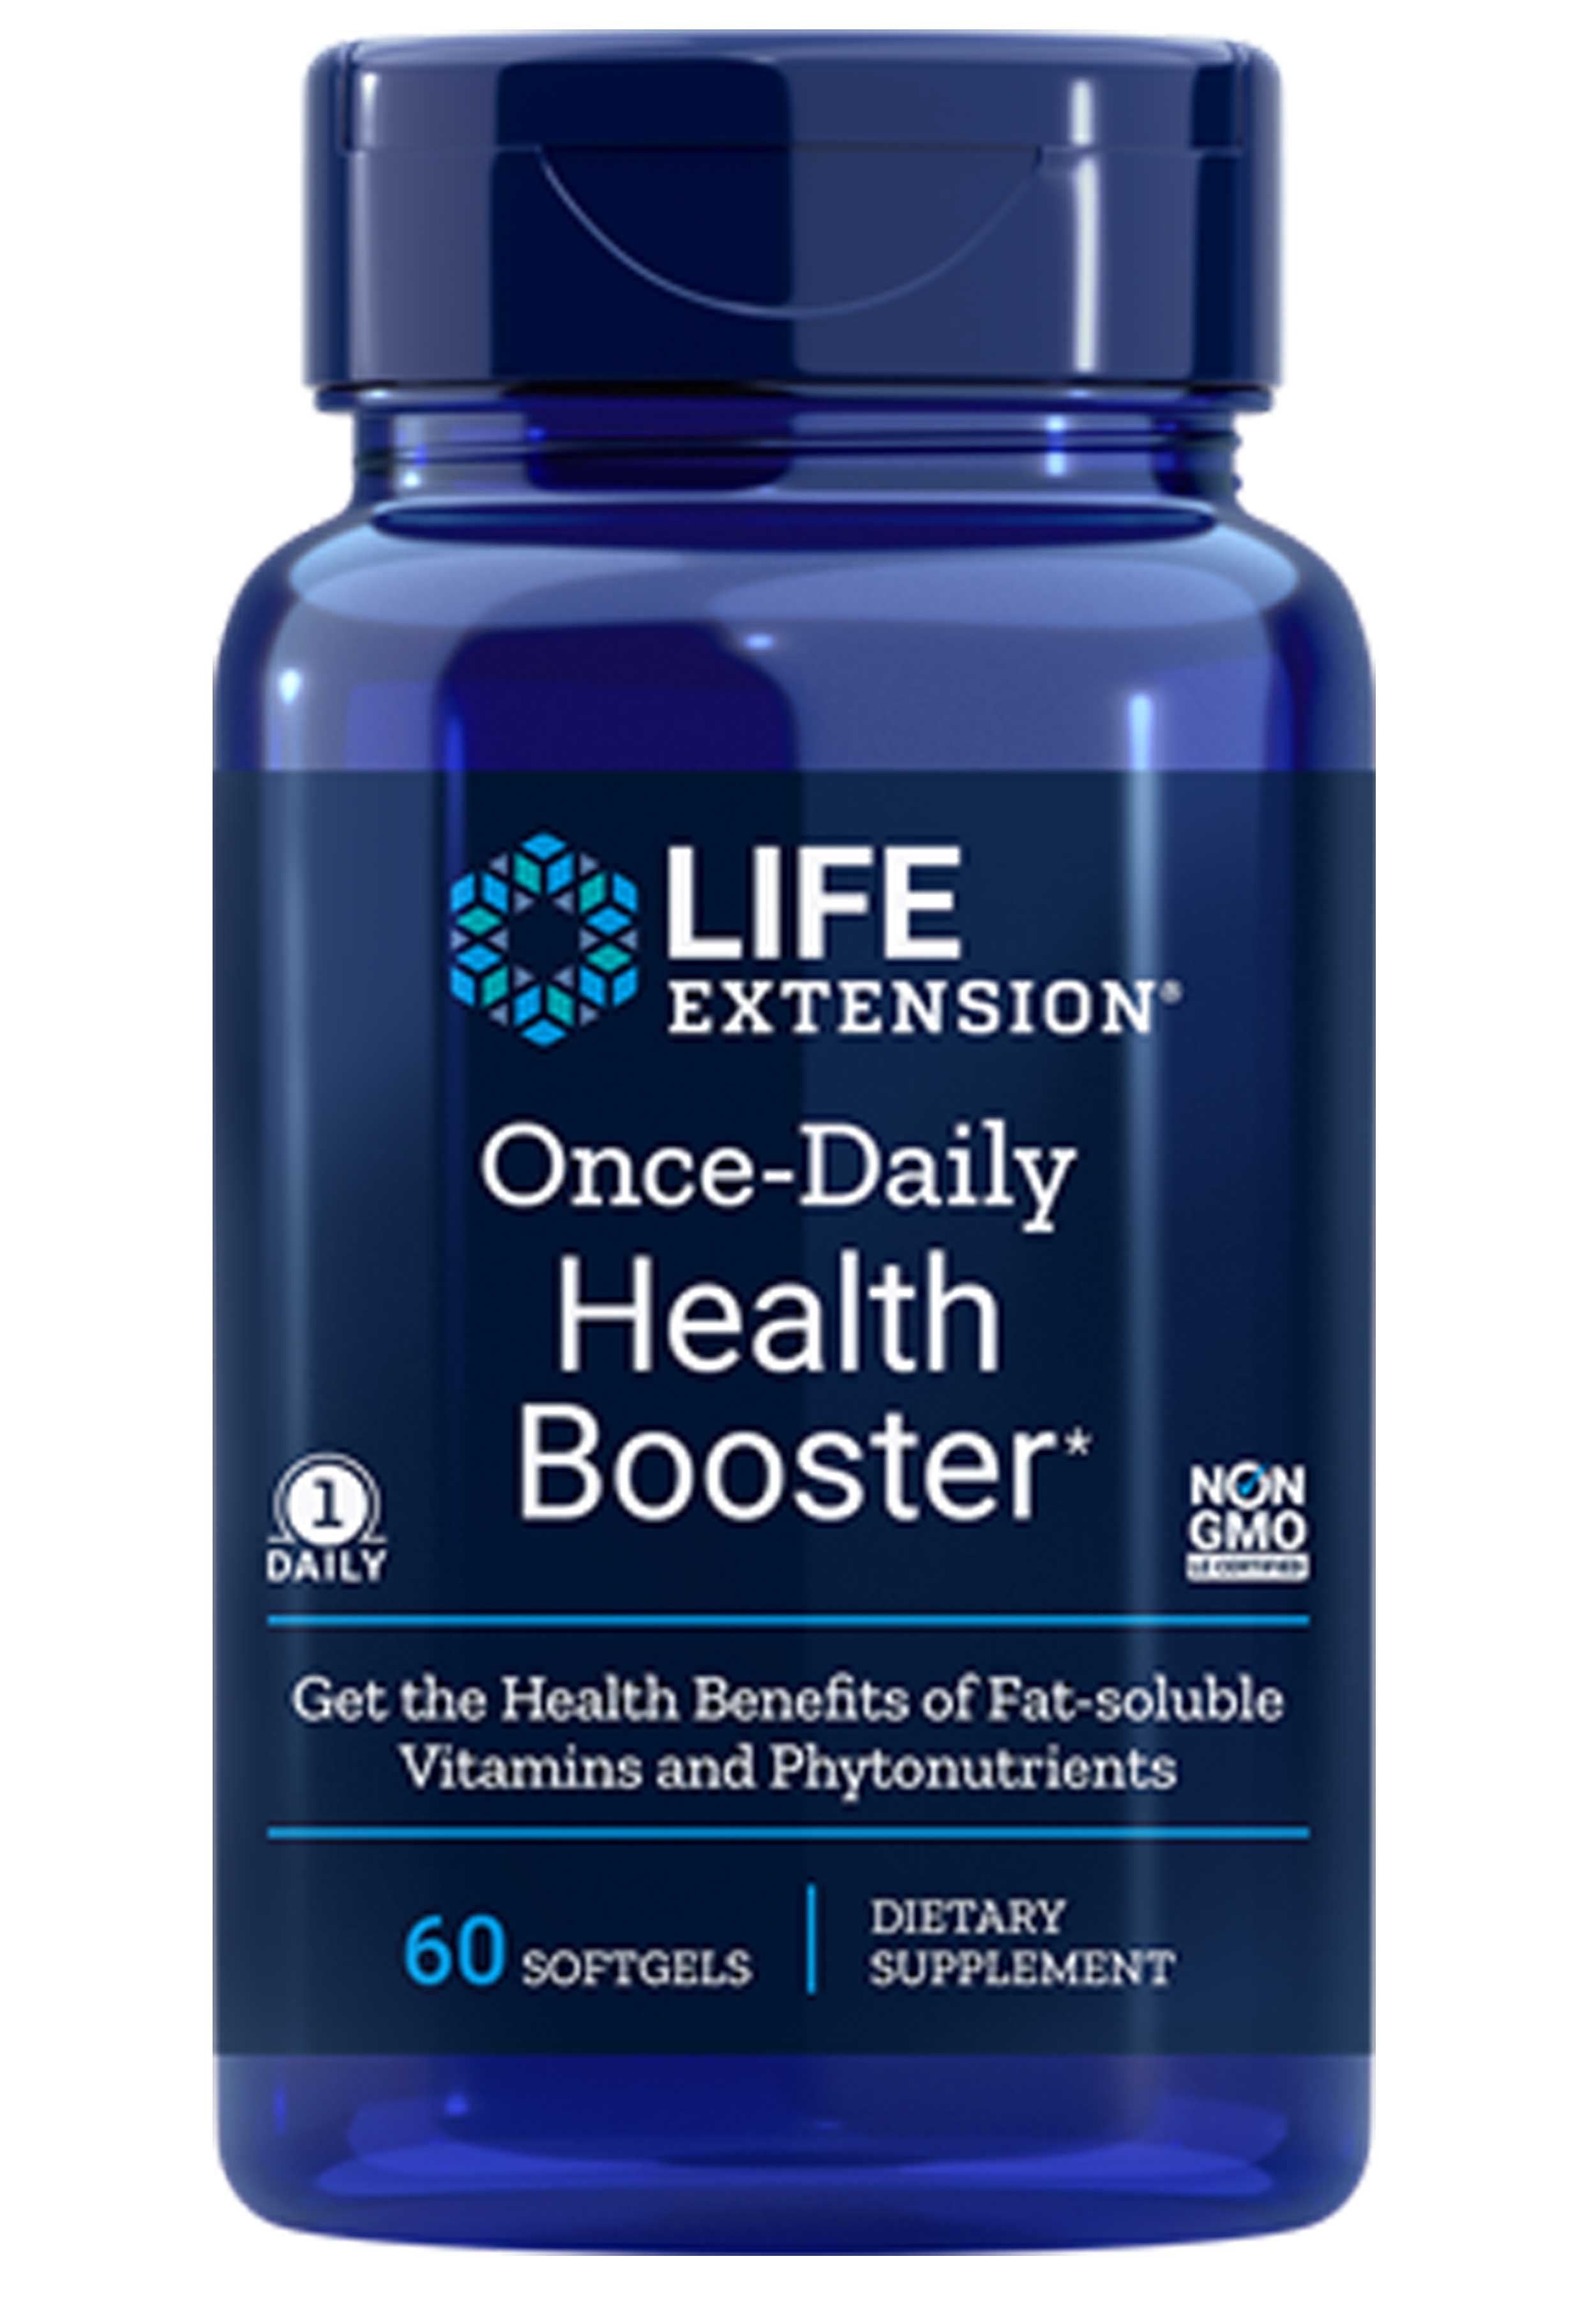 Life Extension Once-Daily Health Booster